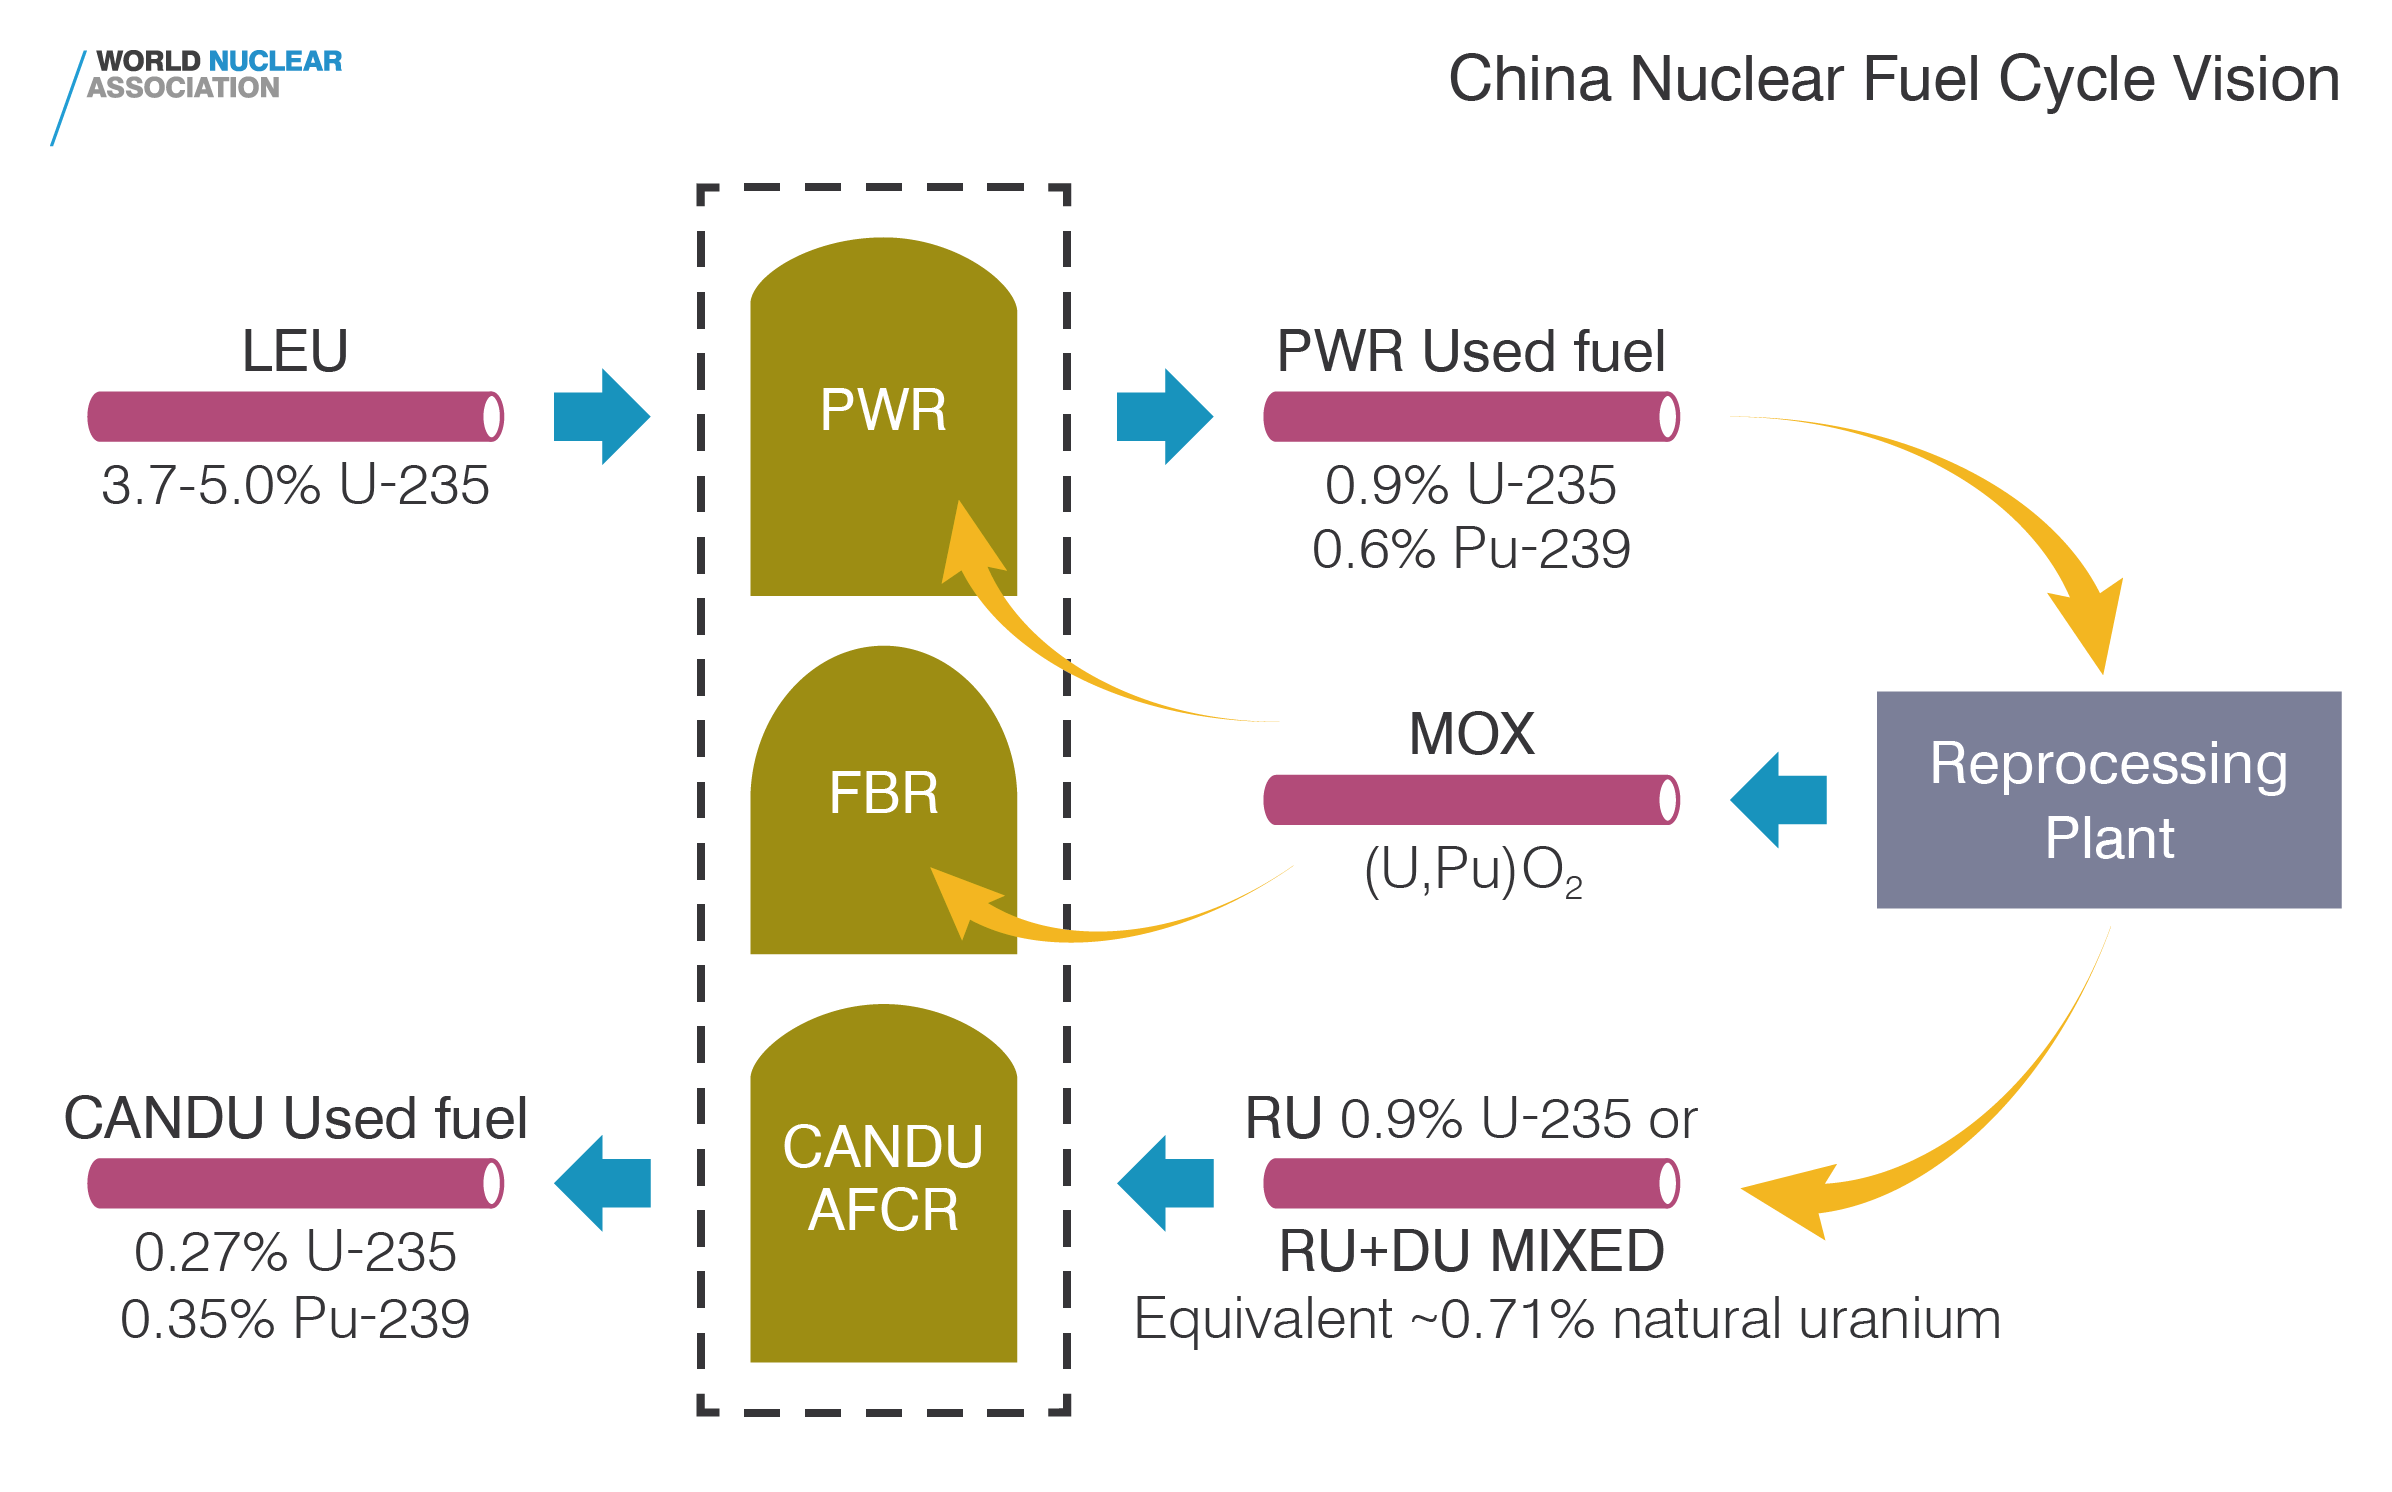 China nuclear fuel cycle vision